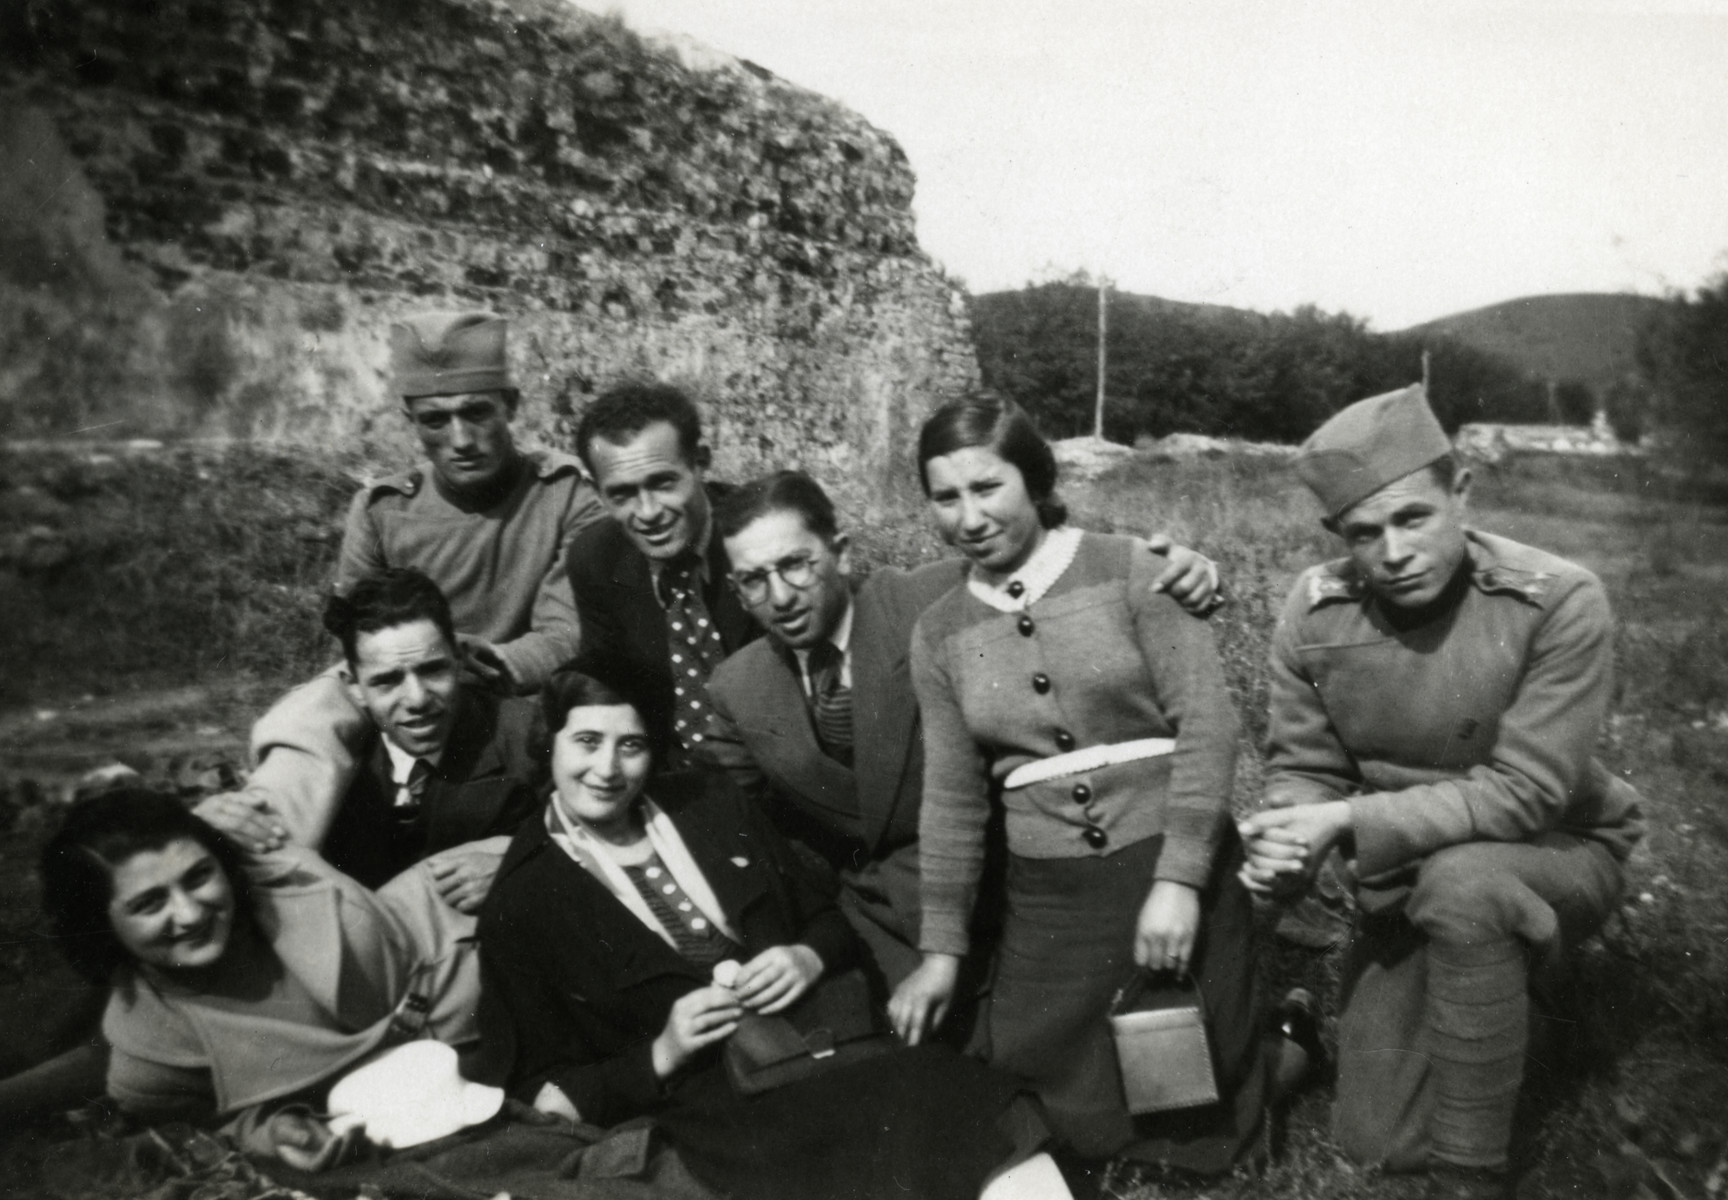 A group of eight young people pose outside in Macedonia.

Moise Cassorla (father of the donor) and one of his sisters sit third and fourth from the right.